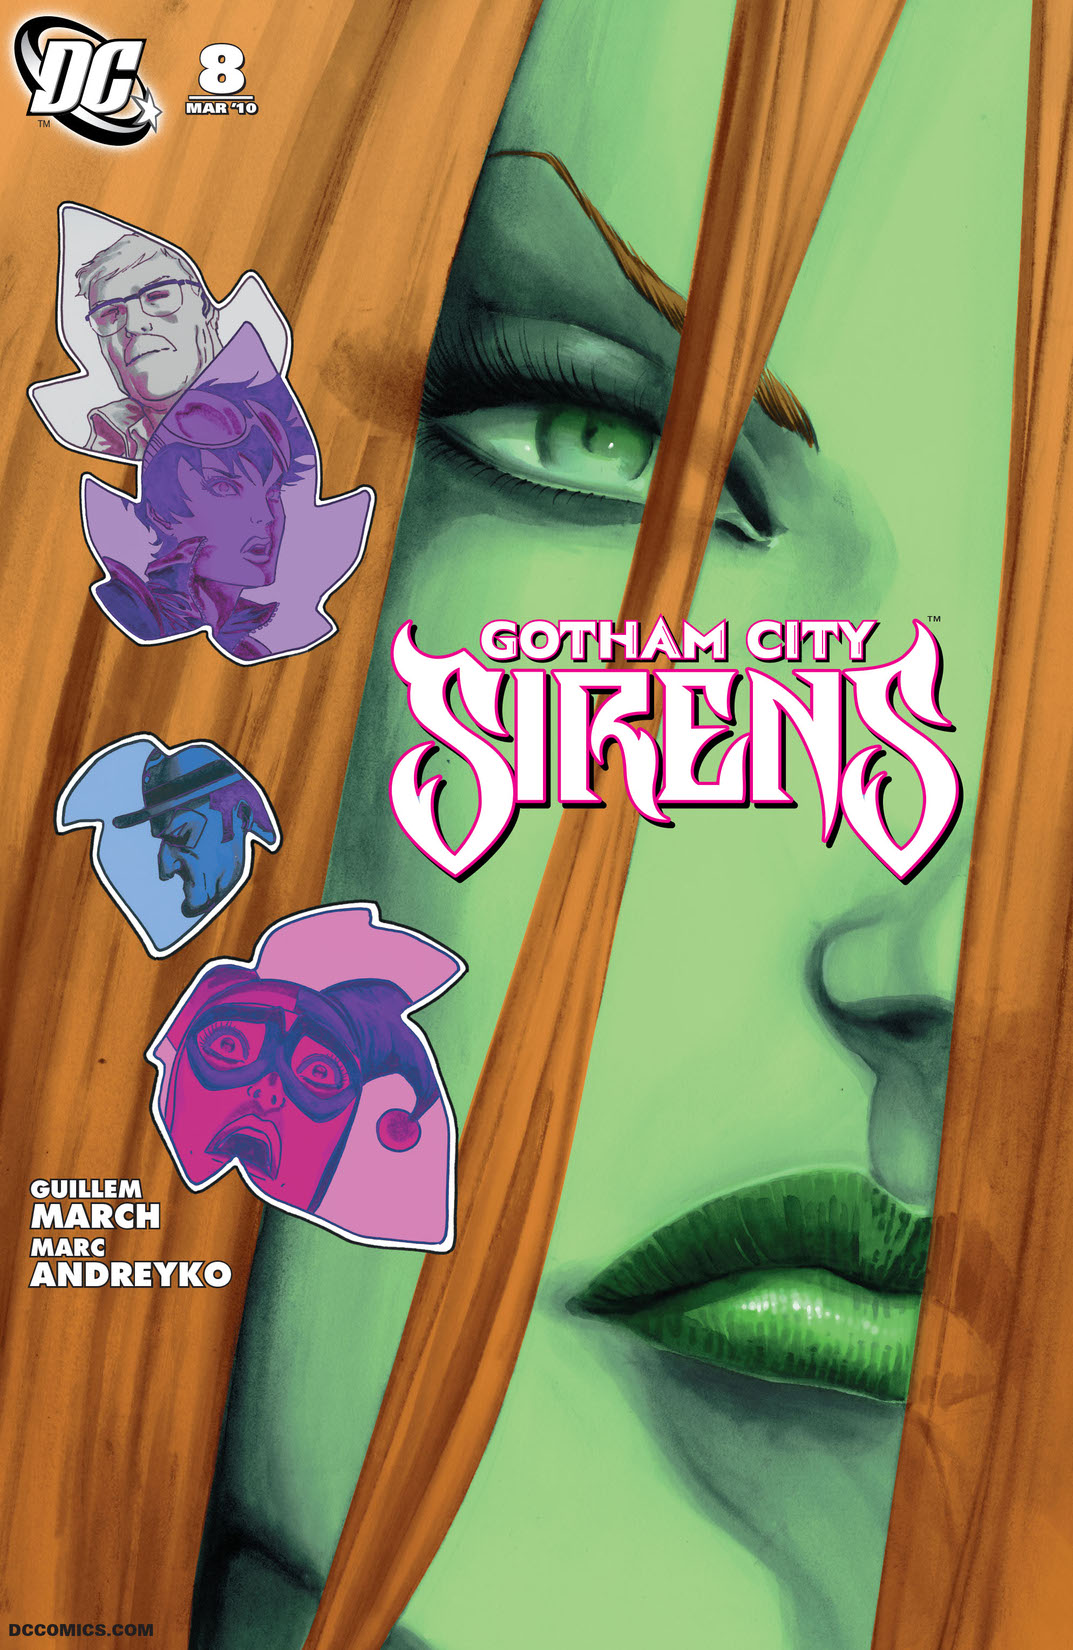 Gotham City Sirens #8 preview images